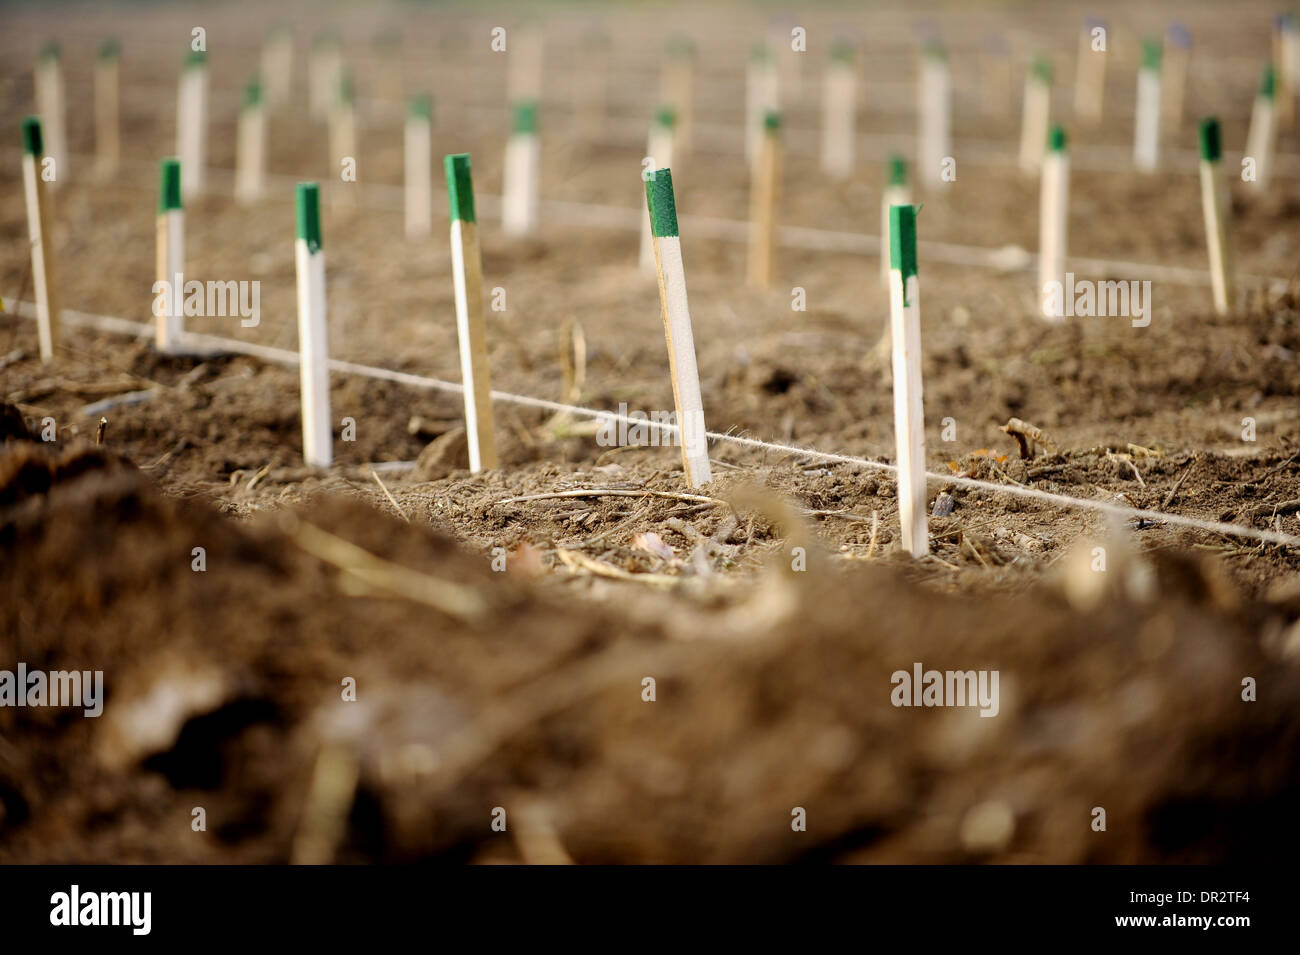 Wooden stakes for supporting tree saplings growing Stock Photo